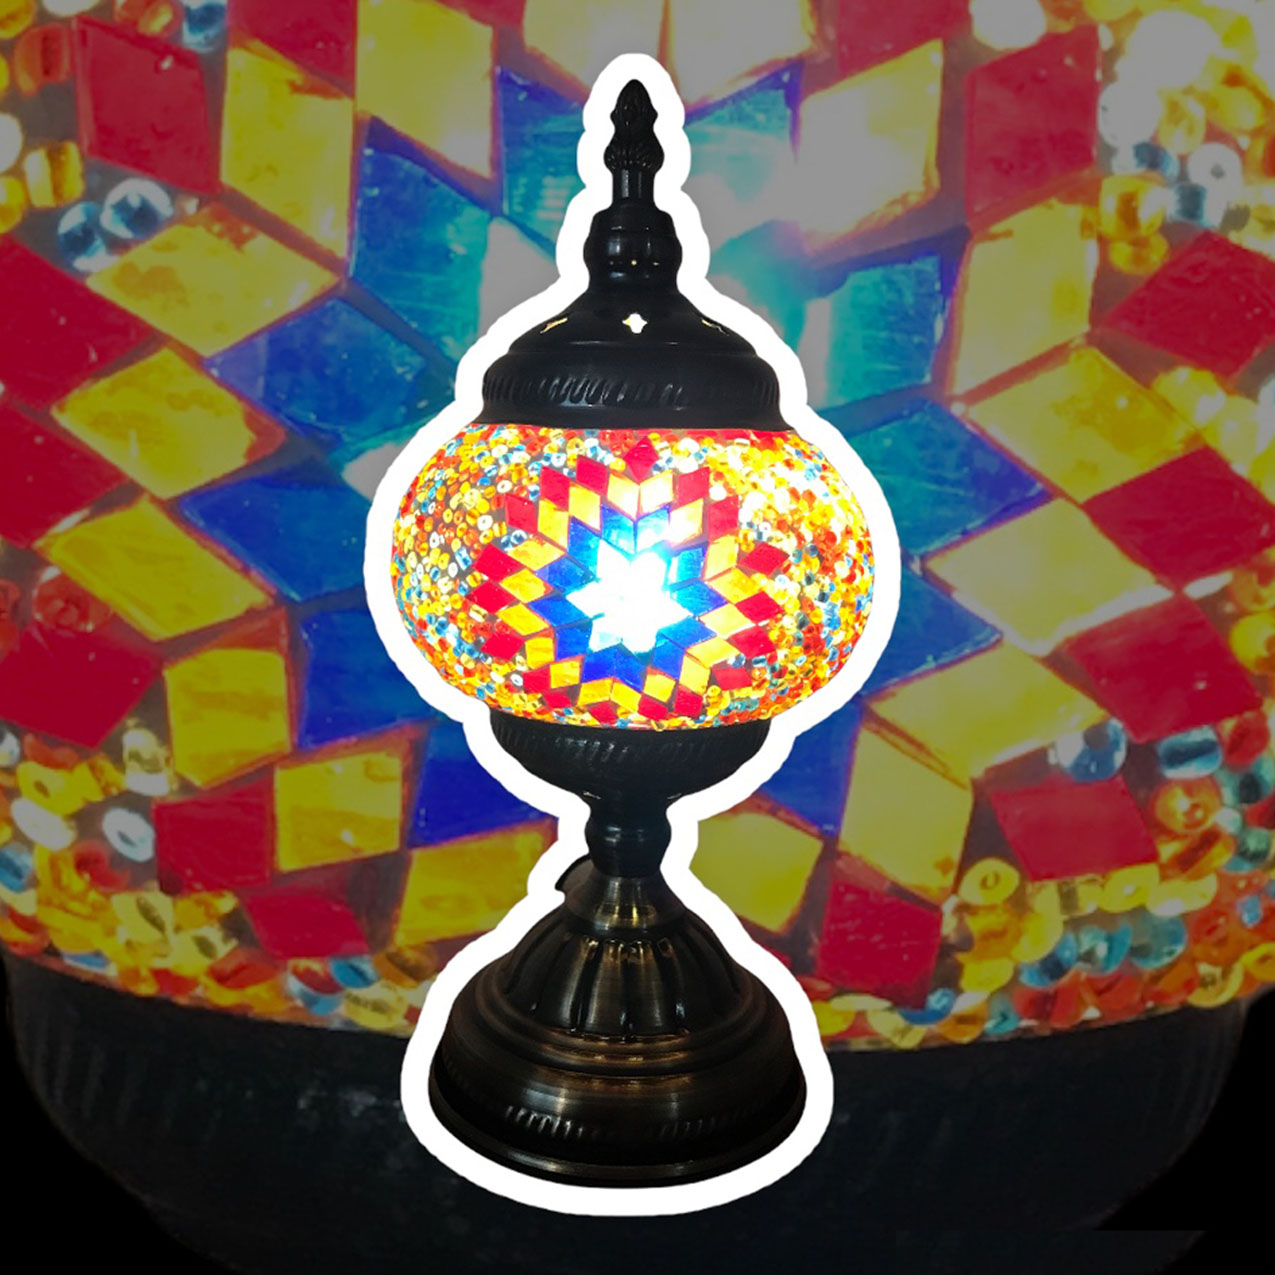 Silverfever Moroccan Lamps Mosaic Turkish Lamp -Three Tier Lanterns Colorful Handmade Glass Floor or Table with E 12 Bulbs Red Yellow Starburst, Size